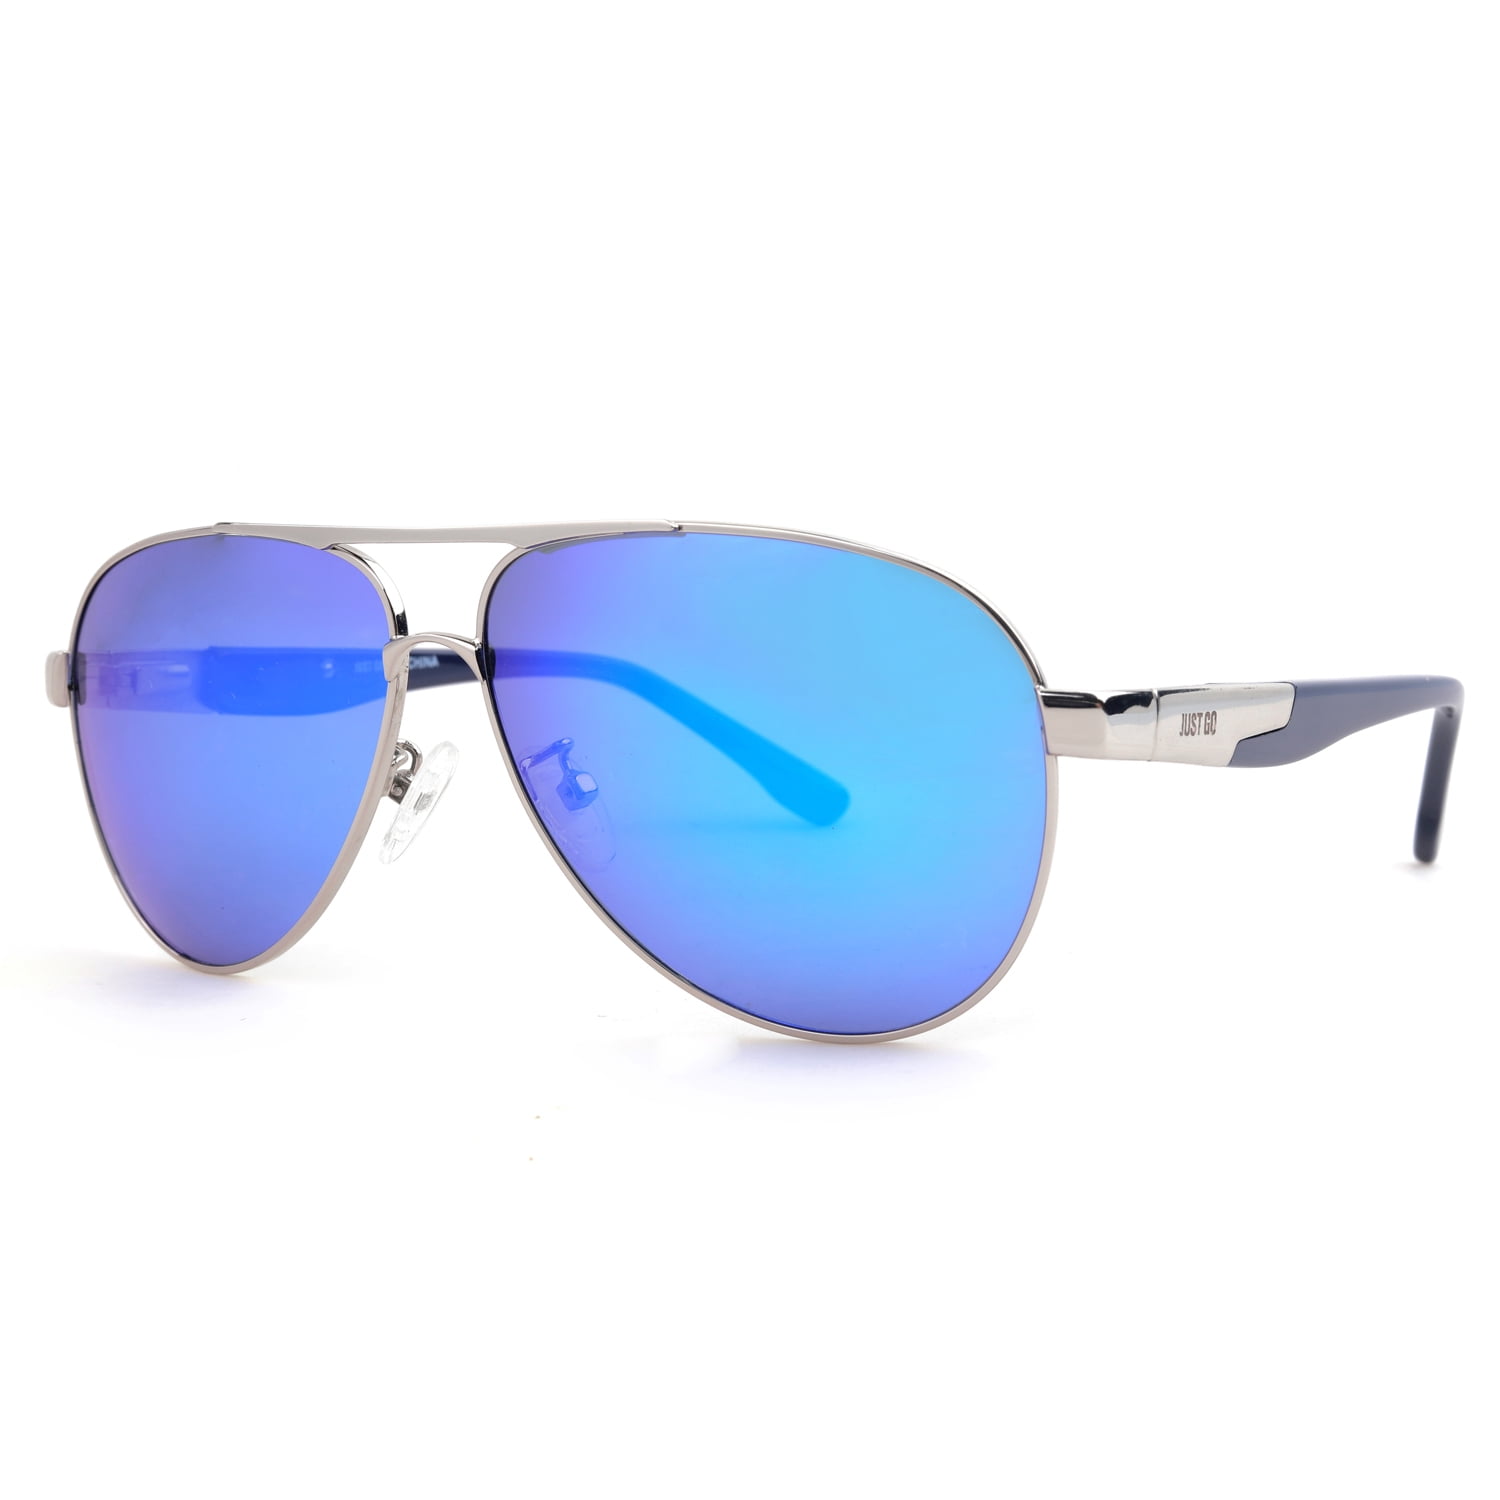 JUST GO Aviator Style for Spring Protection 100%UV Men Hinge, Silver, Women, and Polarized Rove with Sunglasses Blue